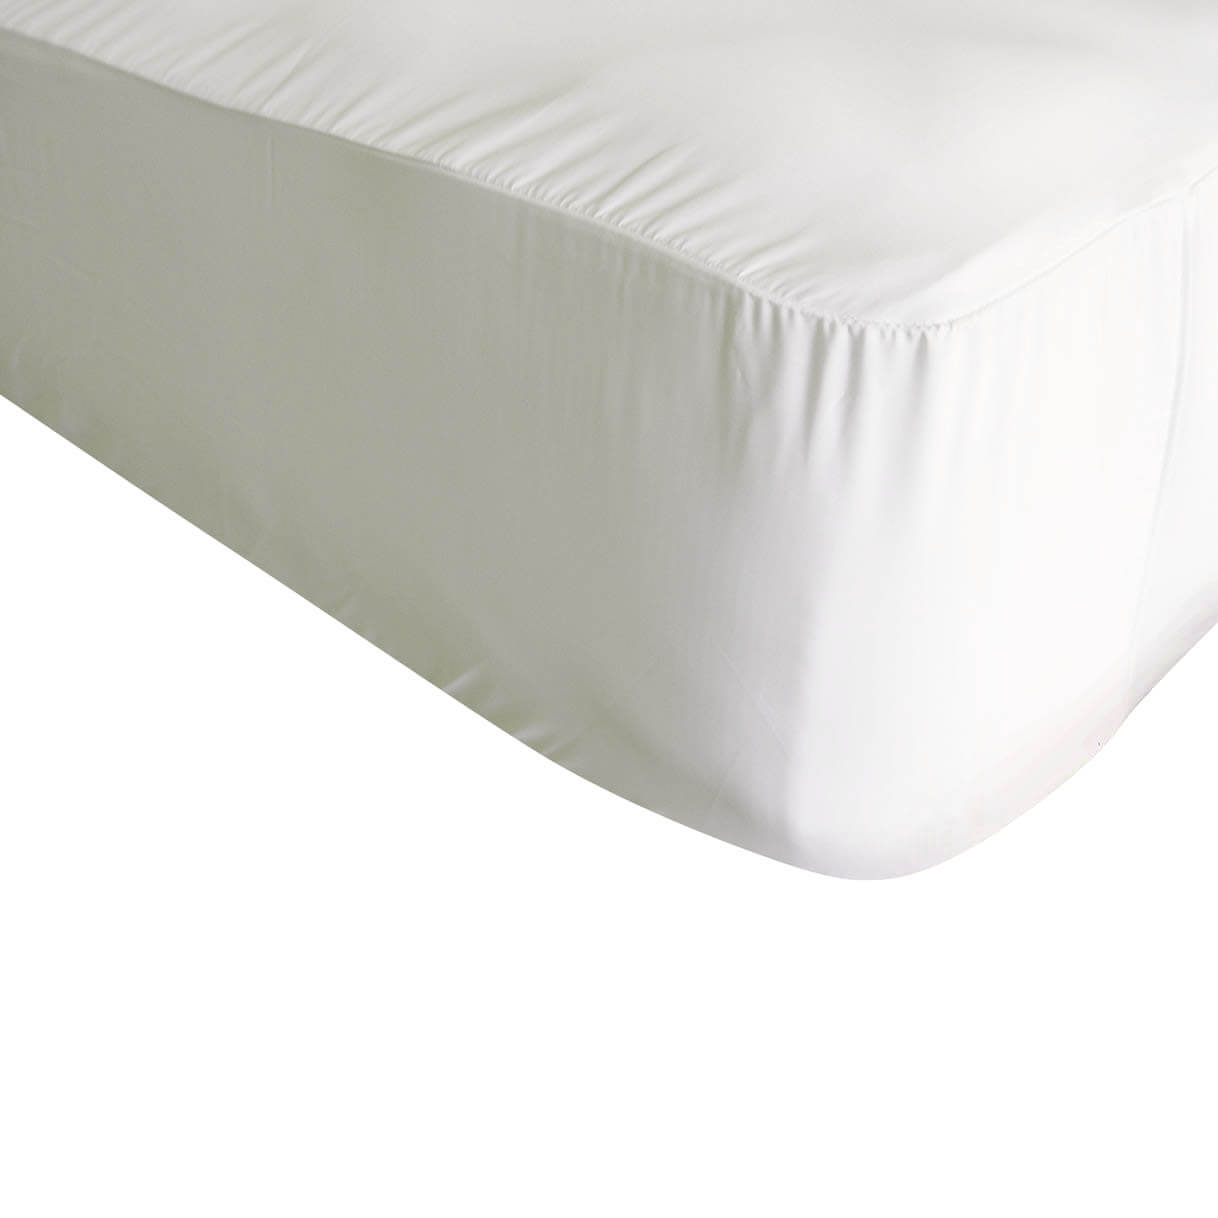 Fitted Mattress Encasings for Air Beds, Water Beds or Travel